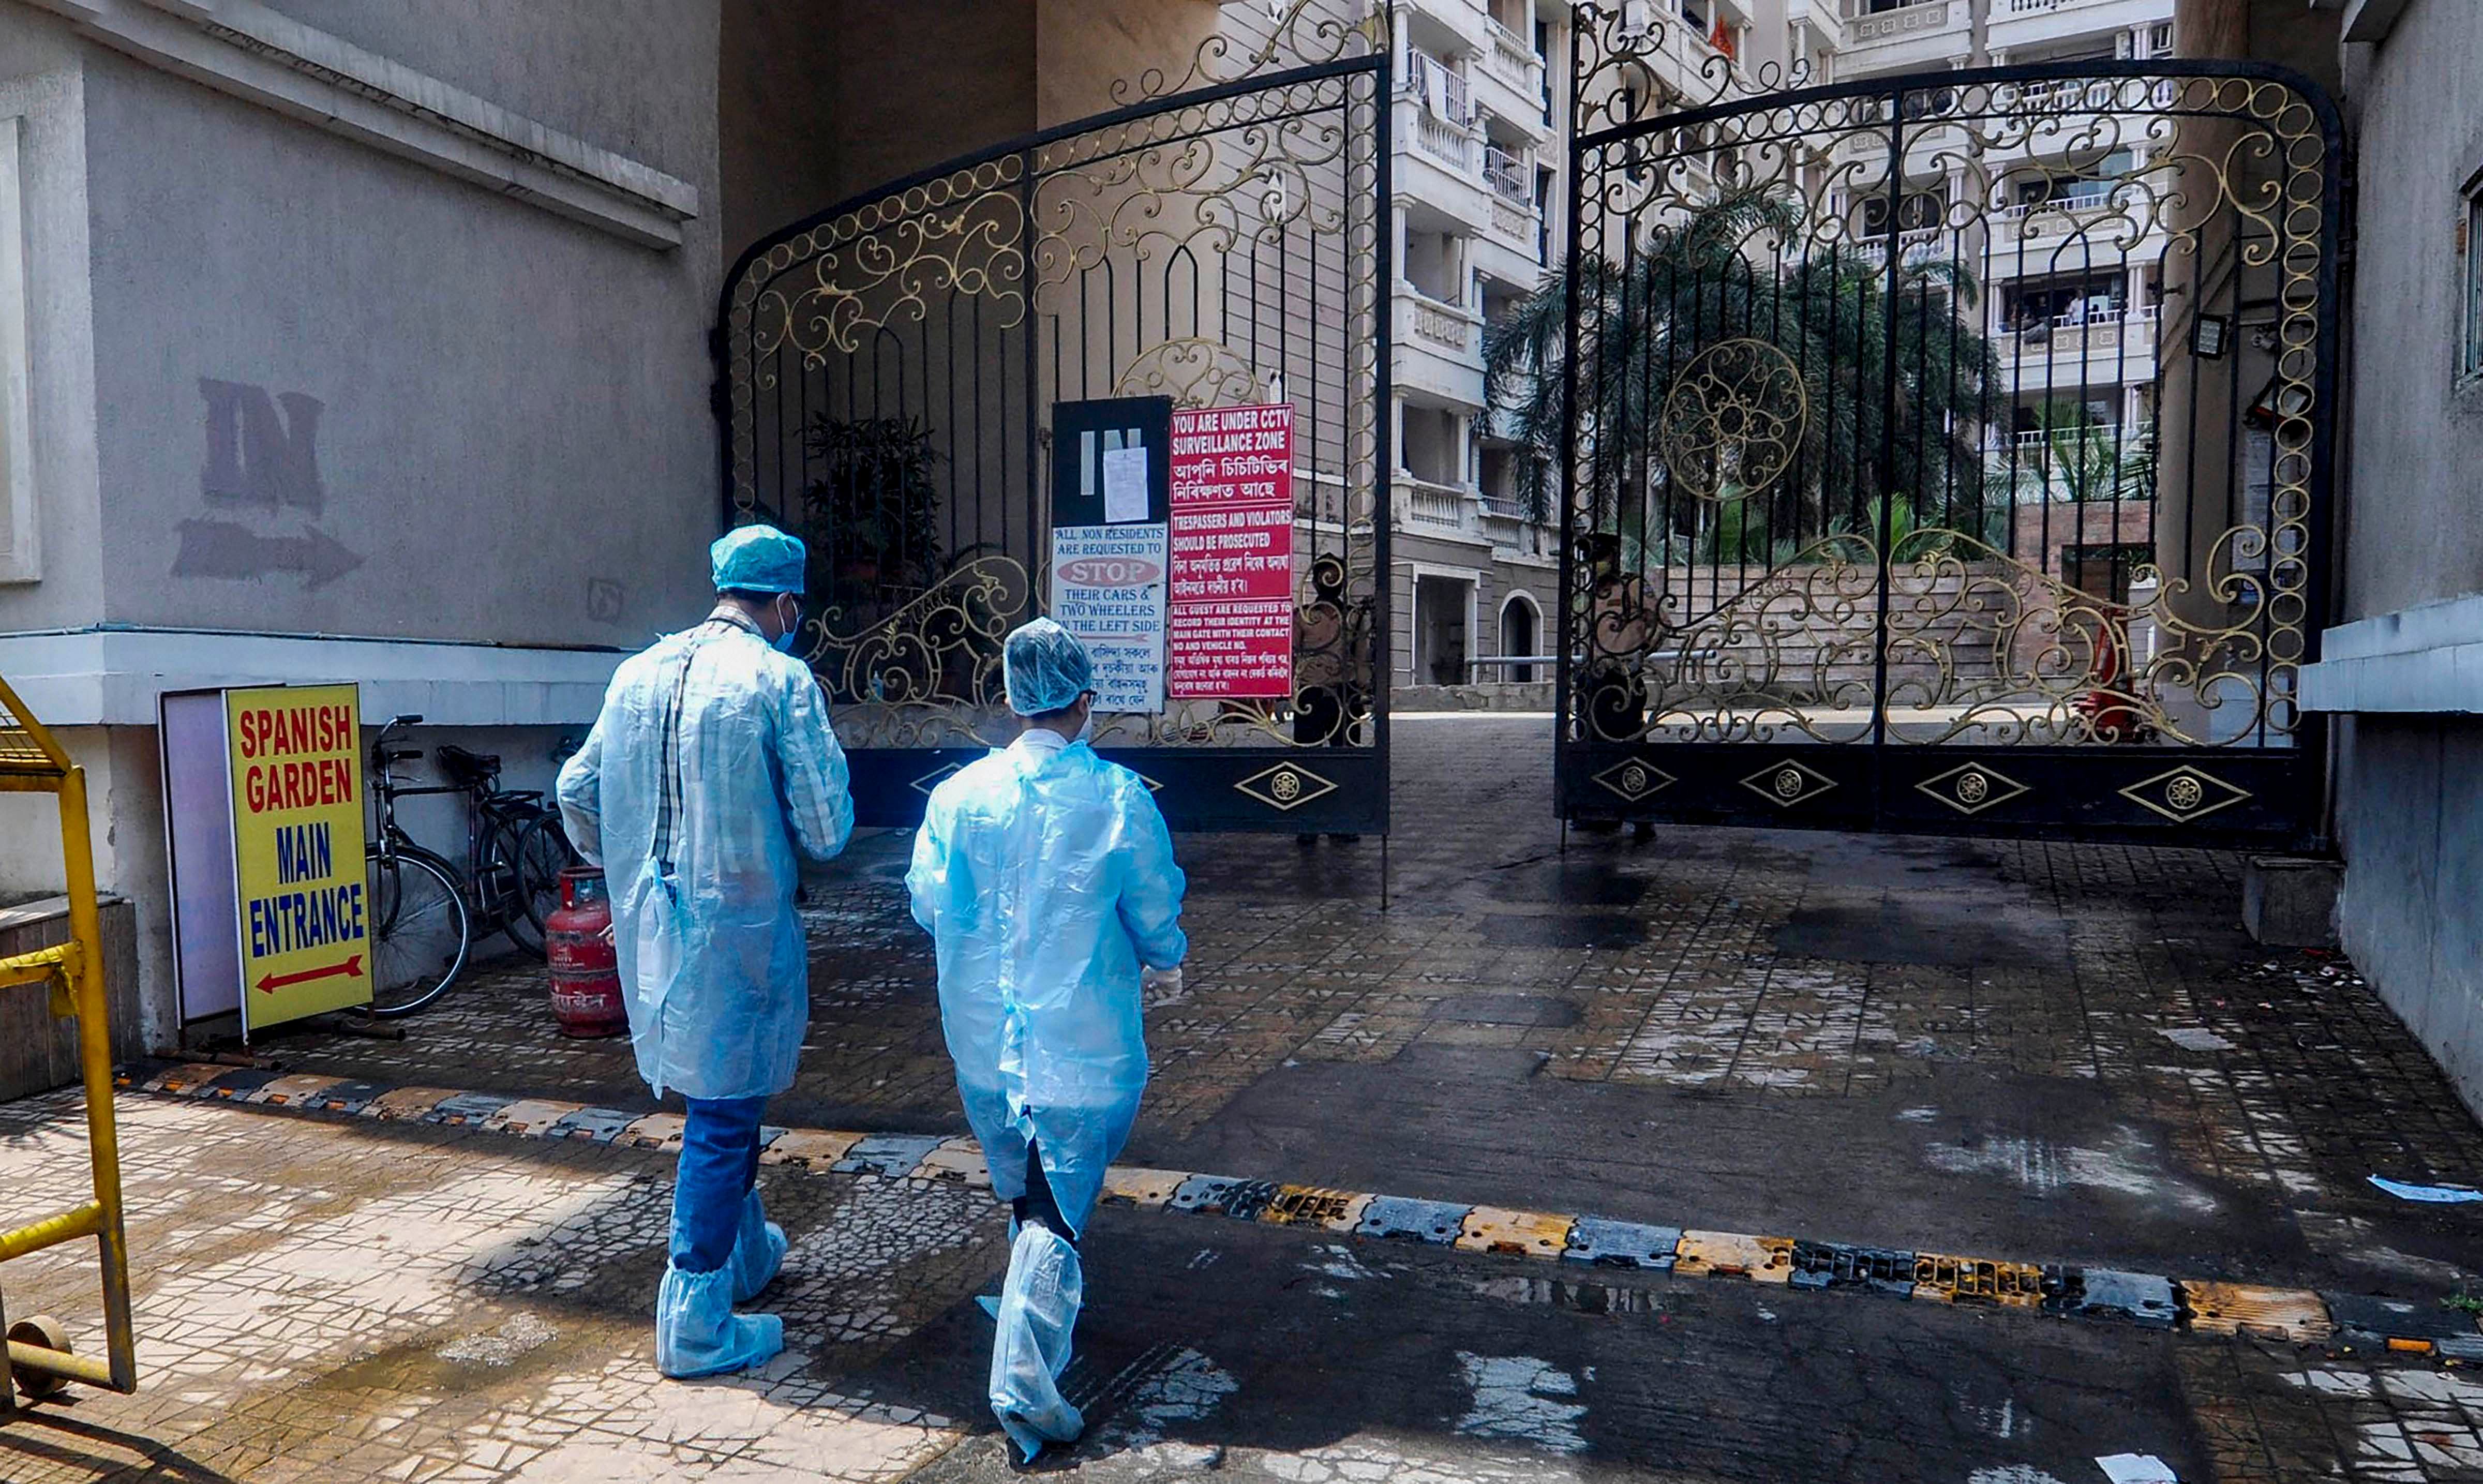 Medics arrive to take blood samples of residents of Spanish Garden residential complex after a COVID-19 positive case was detected in an apartment. (PTI Photo)